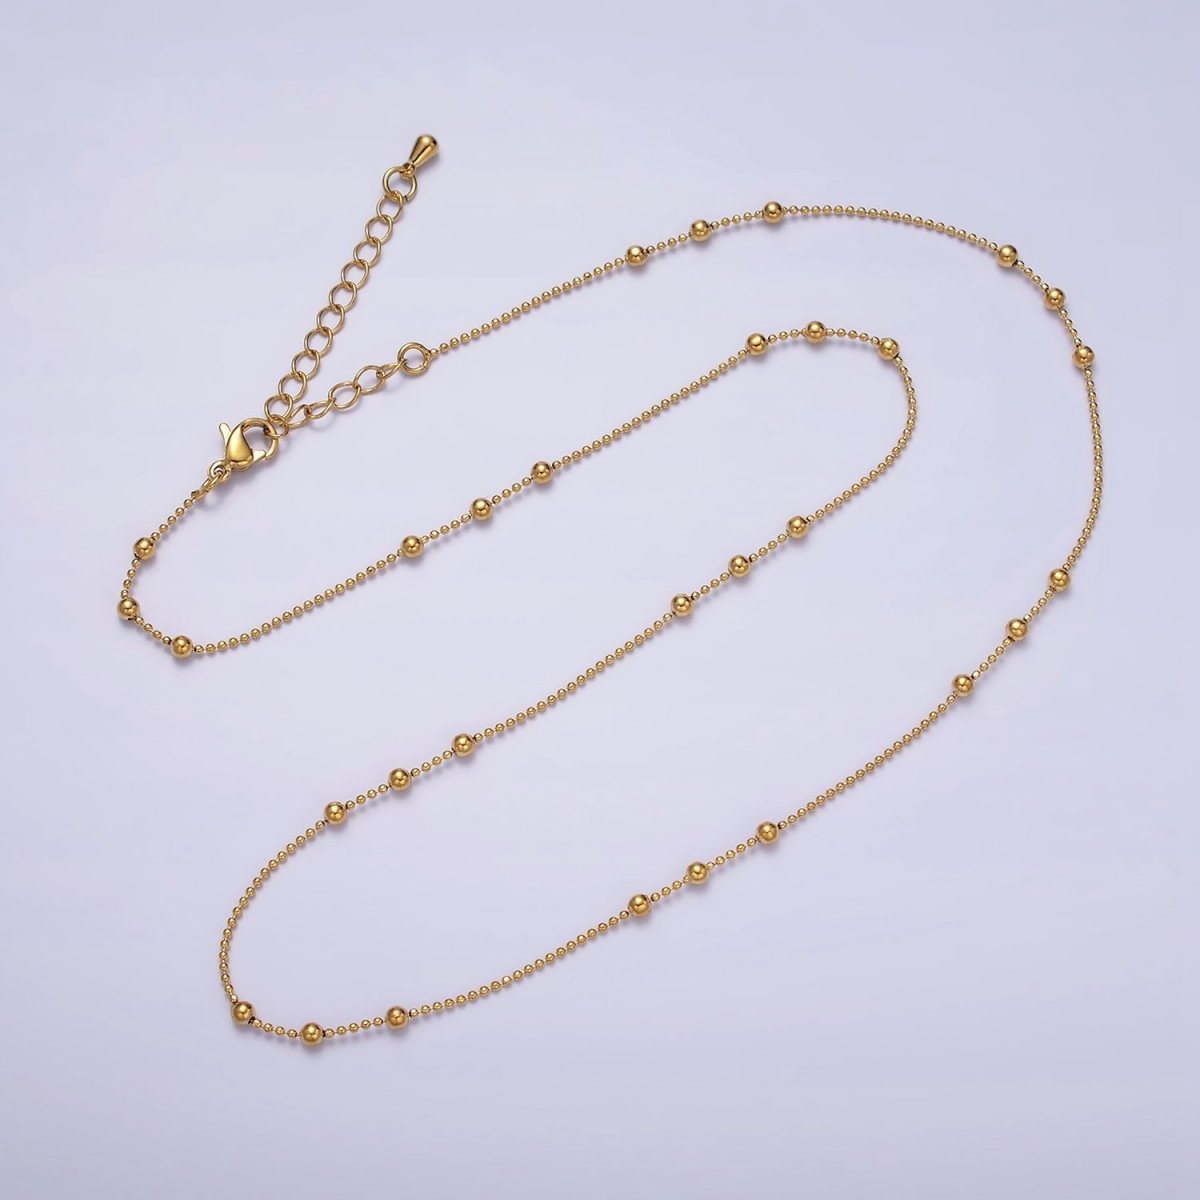 24k Gold Filled Beaded Satellite Chain Gold Filled Silver Chain Simple Everyday Layering Necklace 18 Inch | WA-1853 WA-1854 Clearance Pricing - DLUXCA